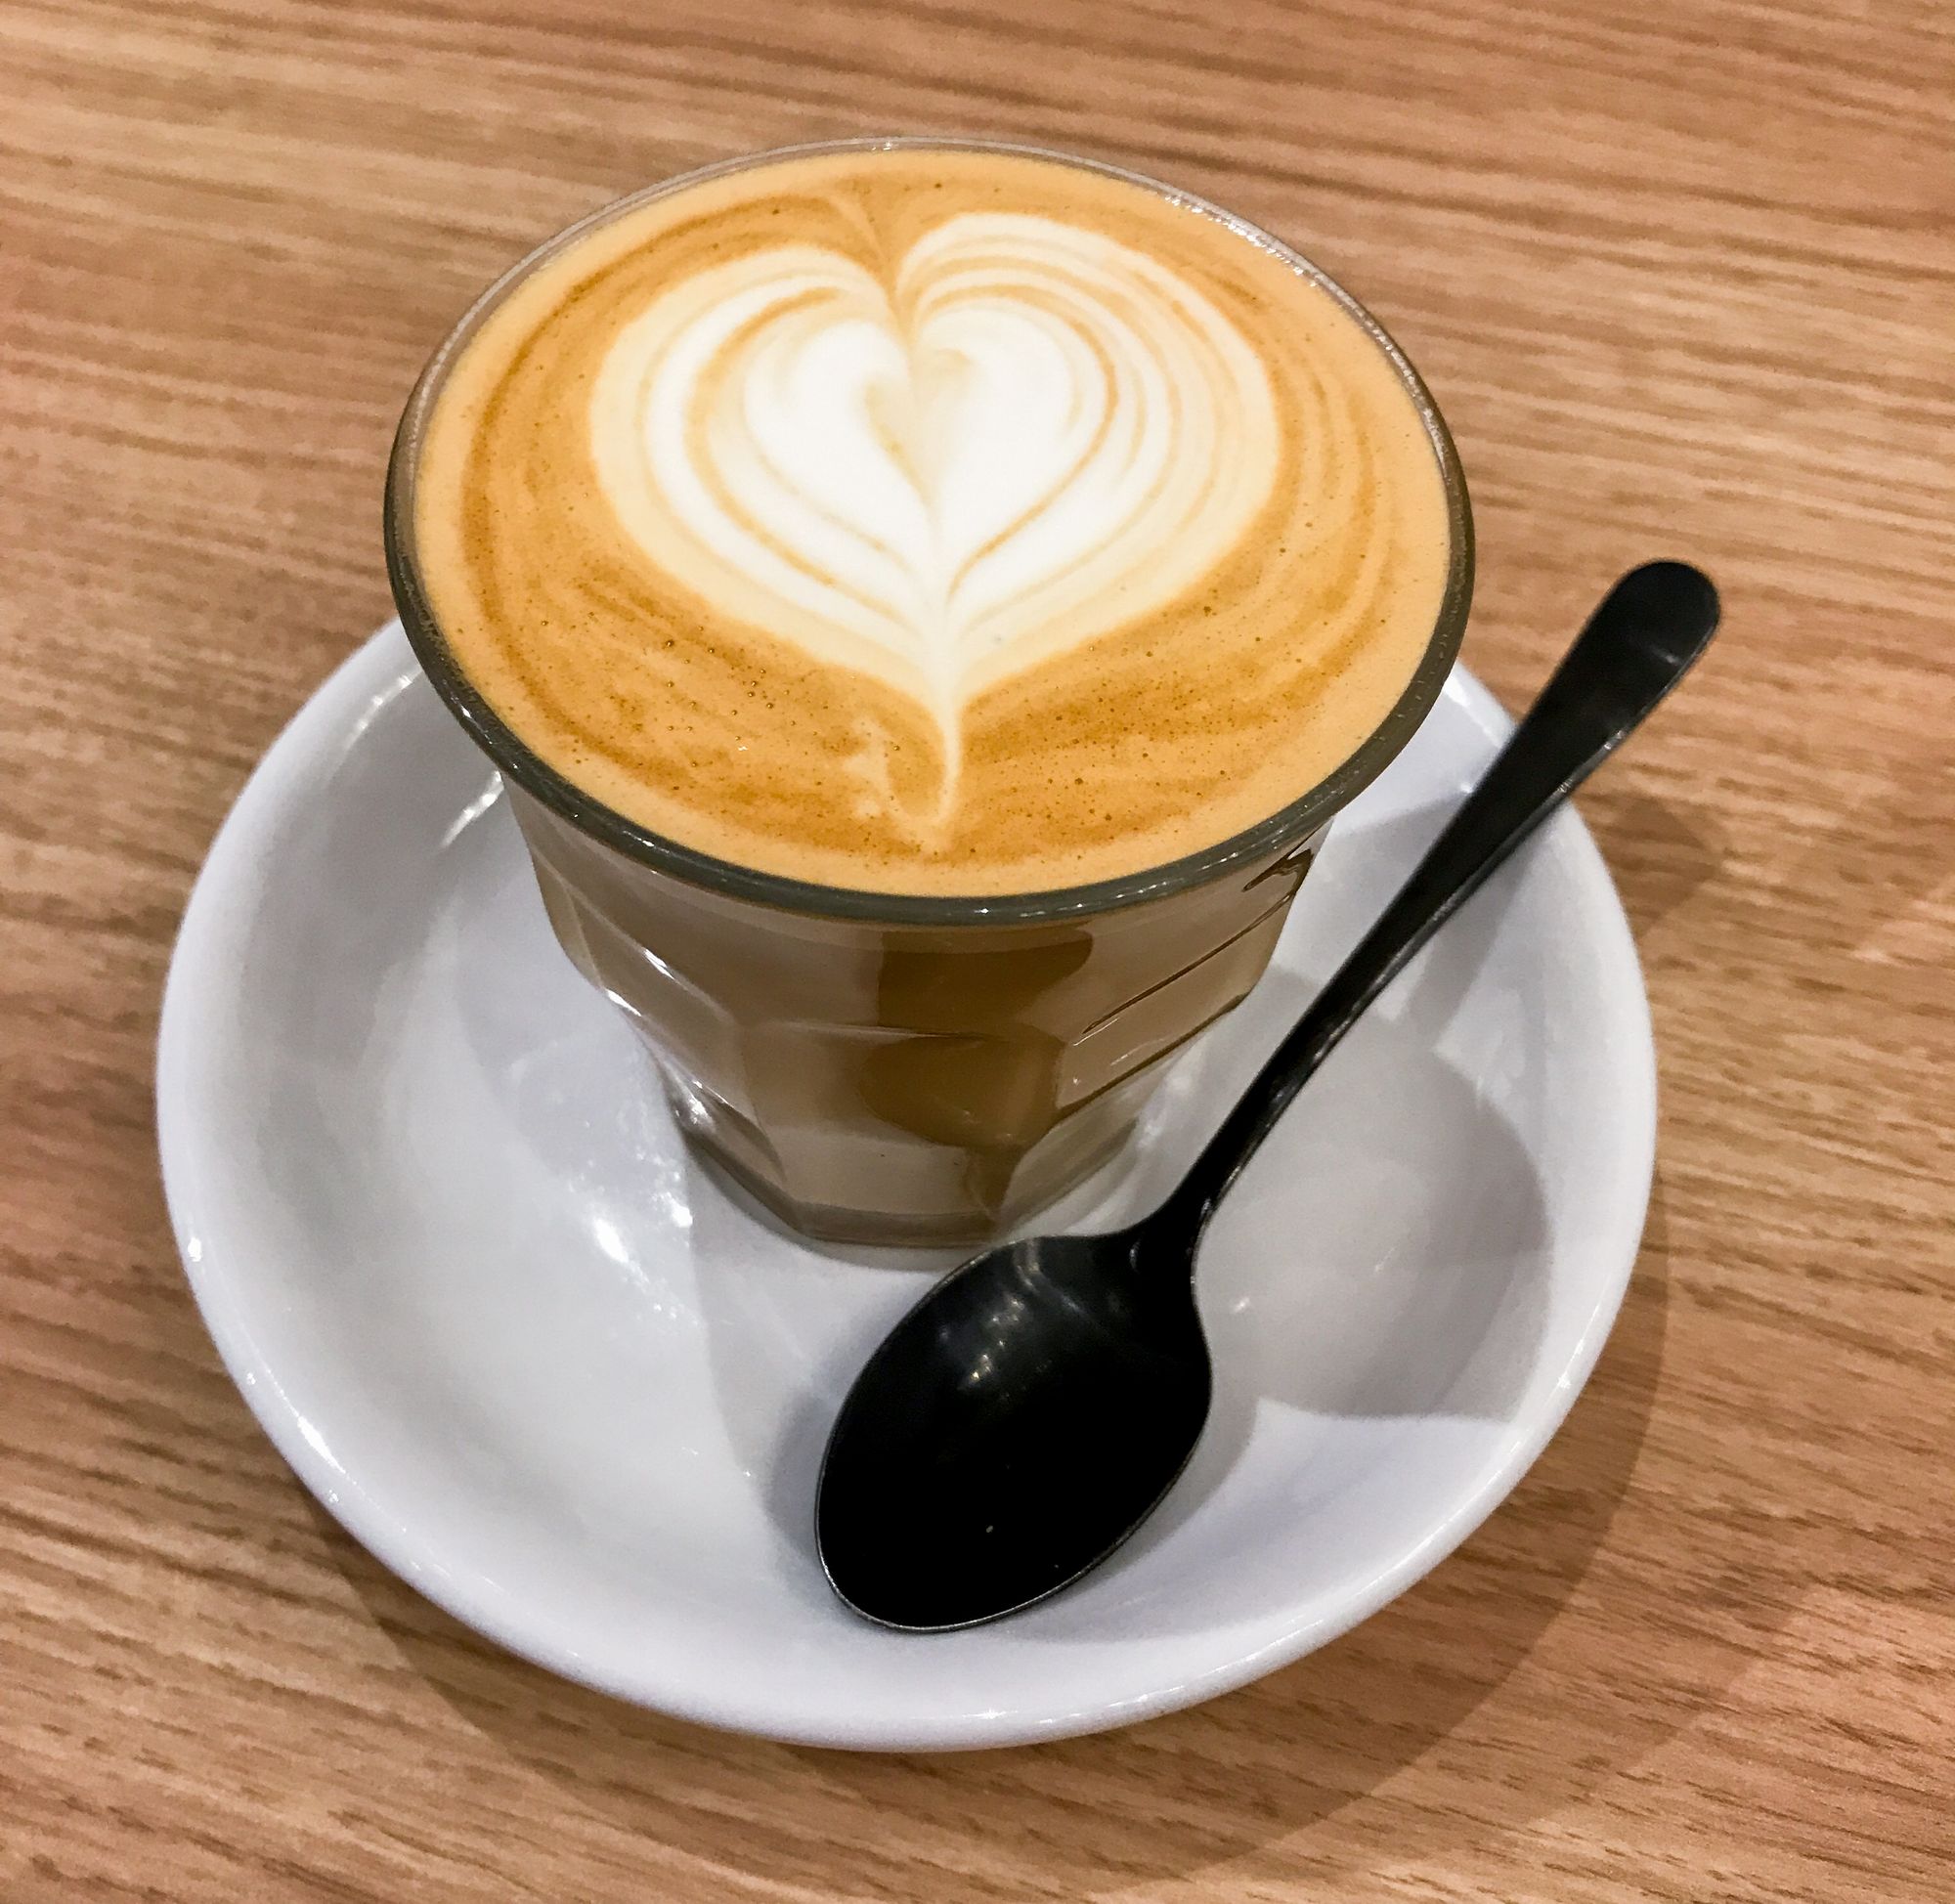 A latte with heart-shaped latte art in a small glass sitting on a white ceramic saucer with a black metal spoon placed on a wooden table